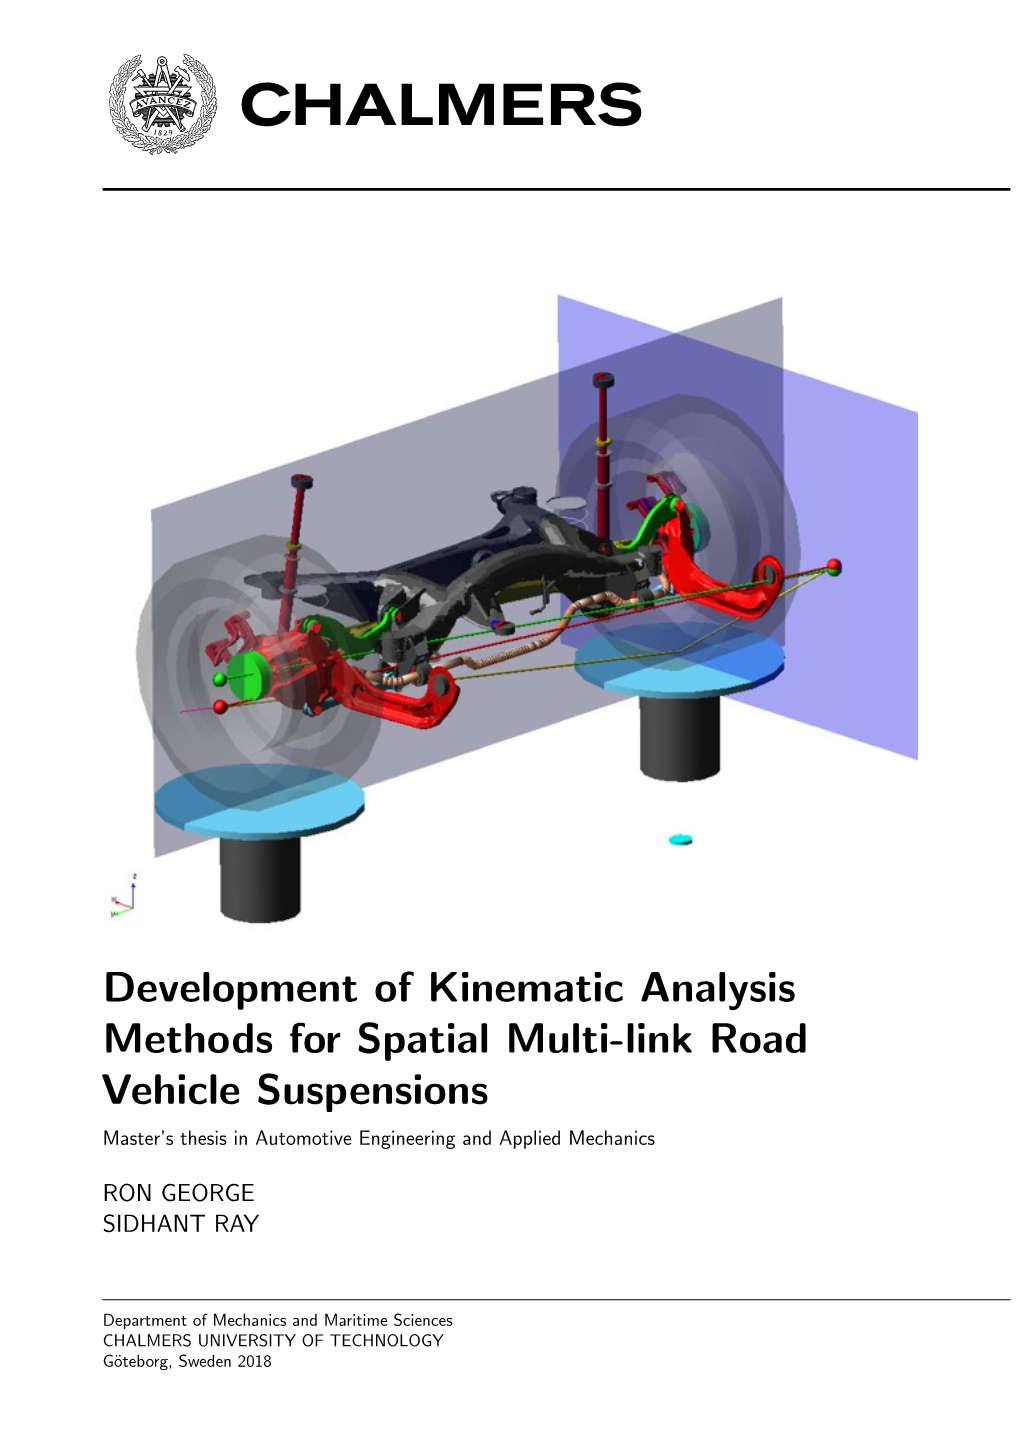 Development of Kinematic Analysis Methods for Spatial Multi-Link Road Vehicle Suspensions Master’S Thesis in Automotive Engineering and Applied Mechanics